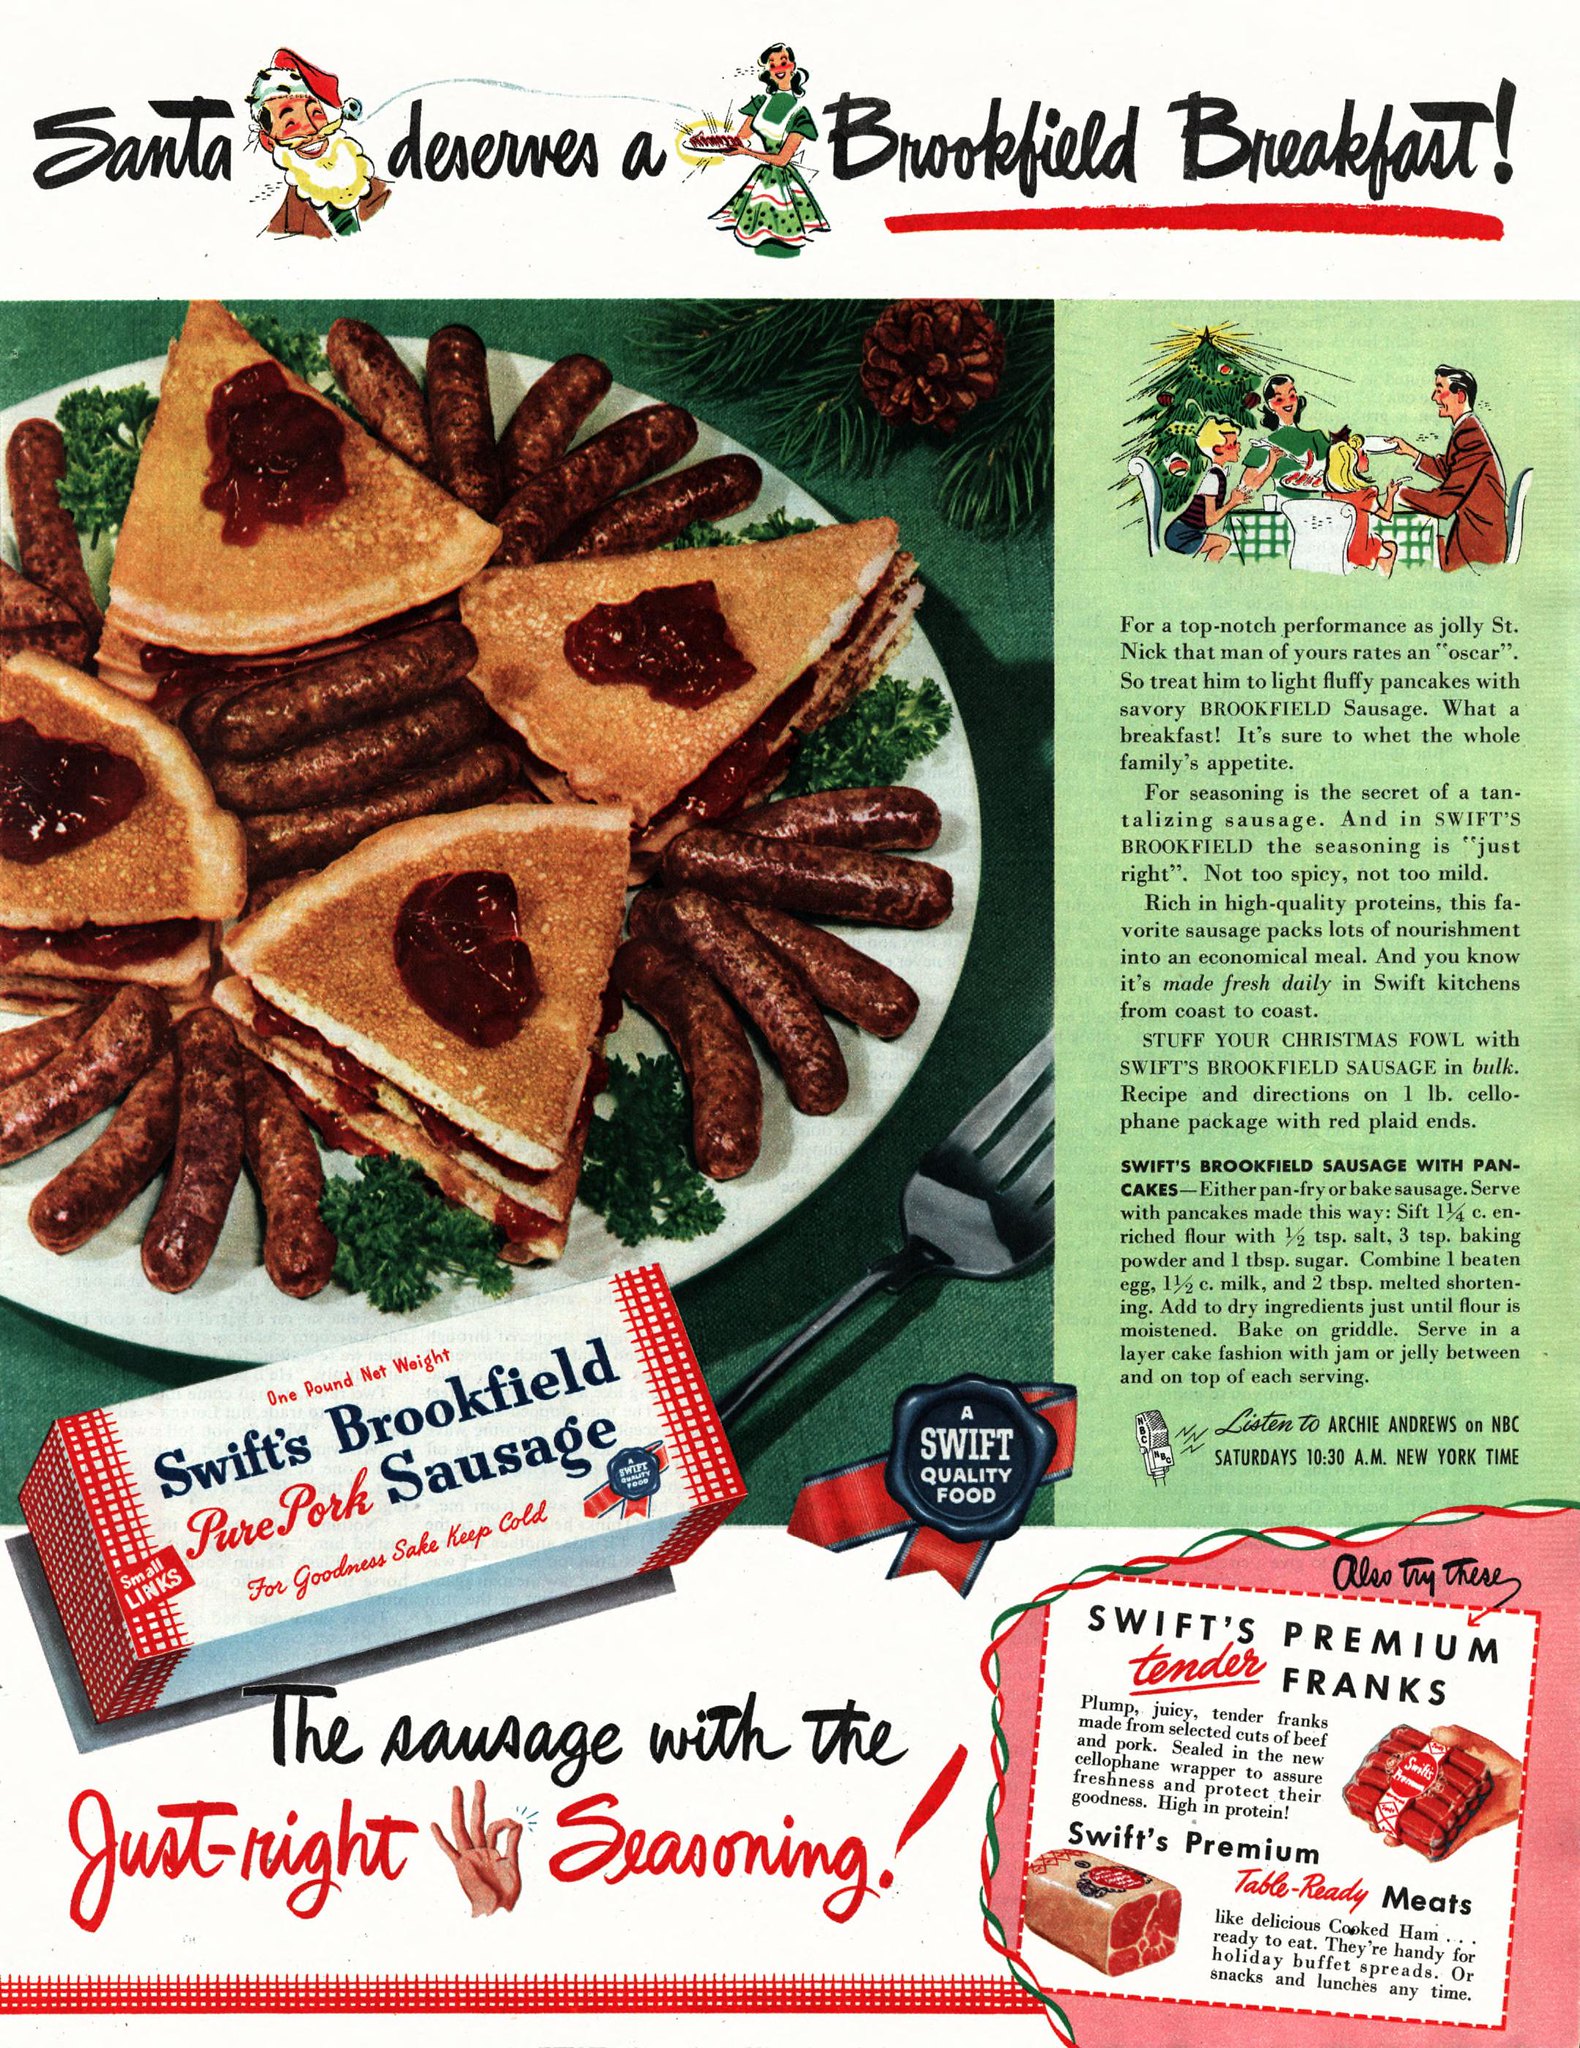 Swift's Brookfield Sausage - published in Collier's (Vol. 120, No. 25) - December 20, 1947